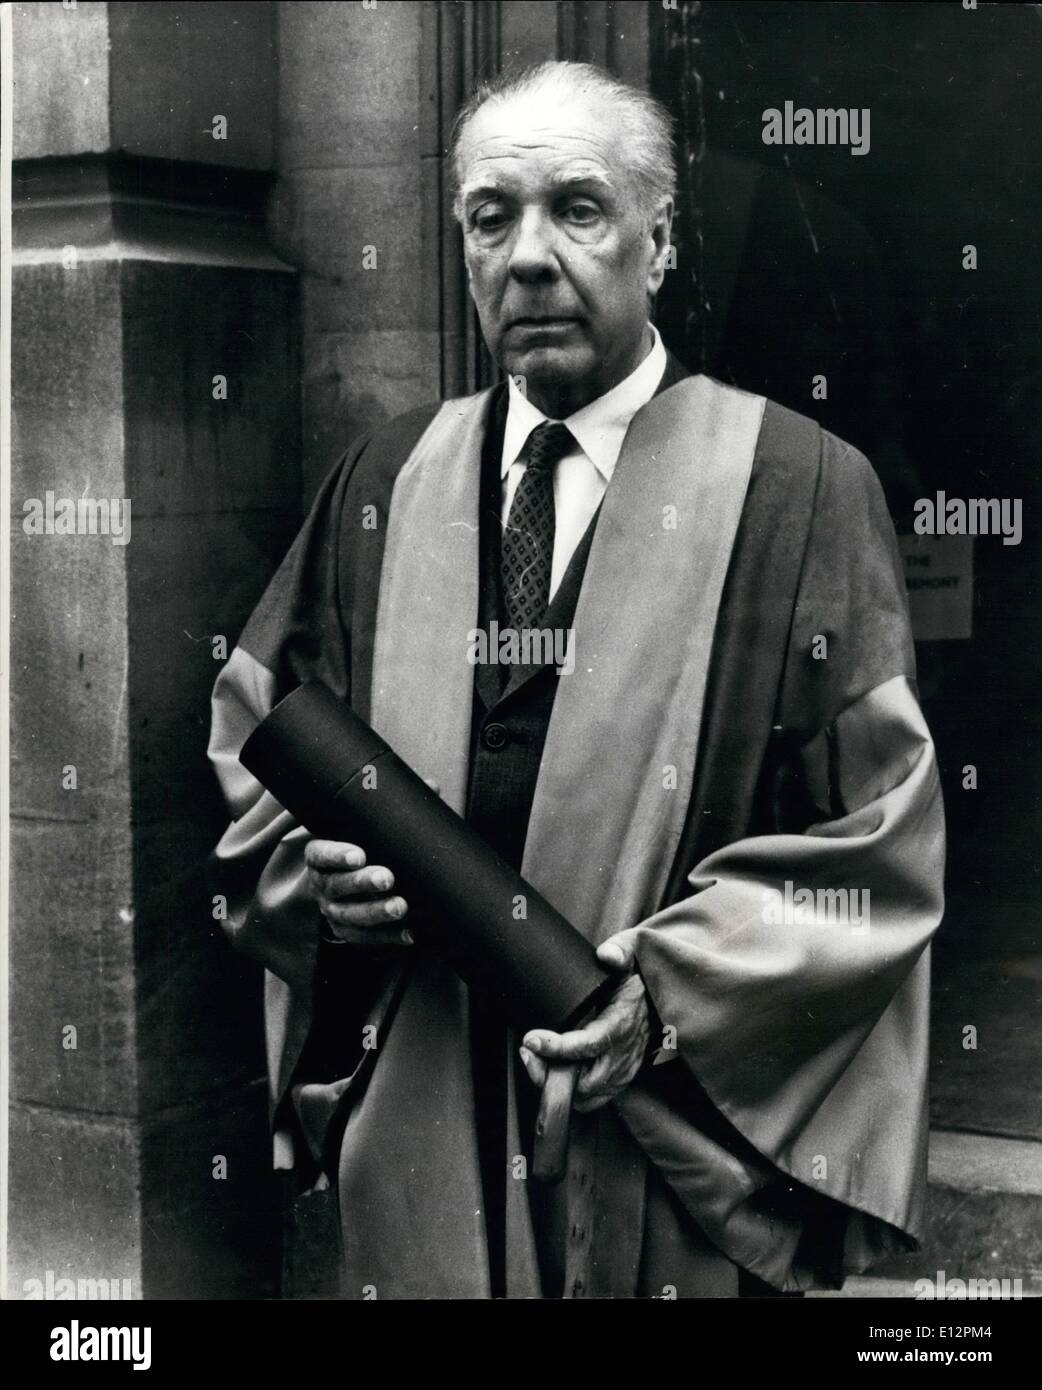 Feb. 24, 2012 - Blind Argentine Writer and Poet Receives Honorary Doctorate of letters at Oxford University: Jorge Luis Borges, Stock Photo